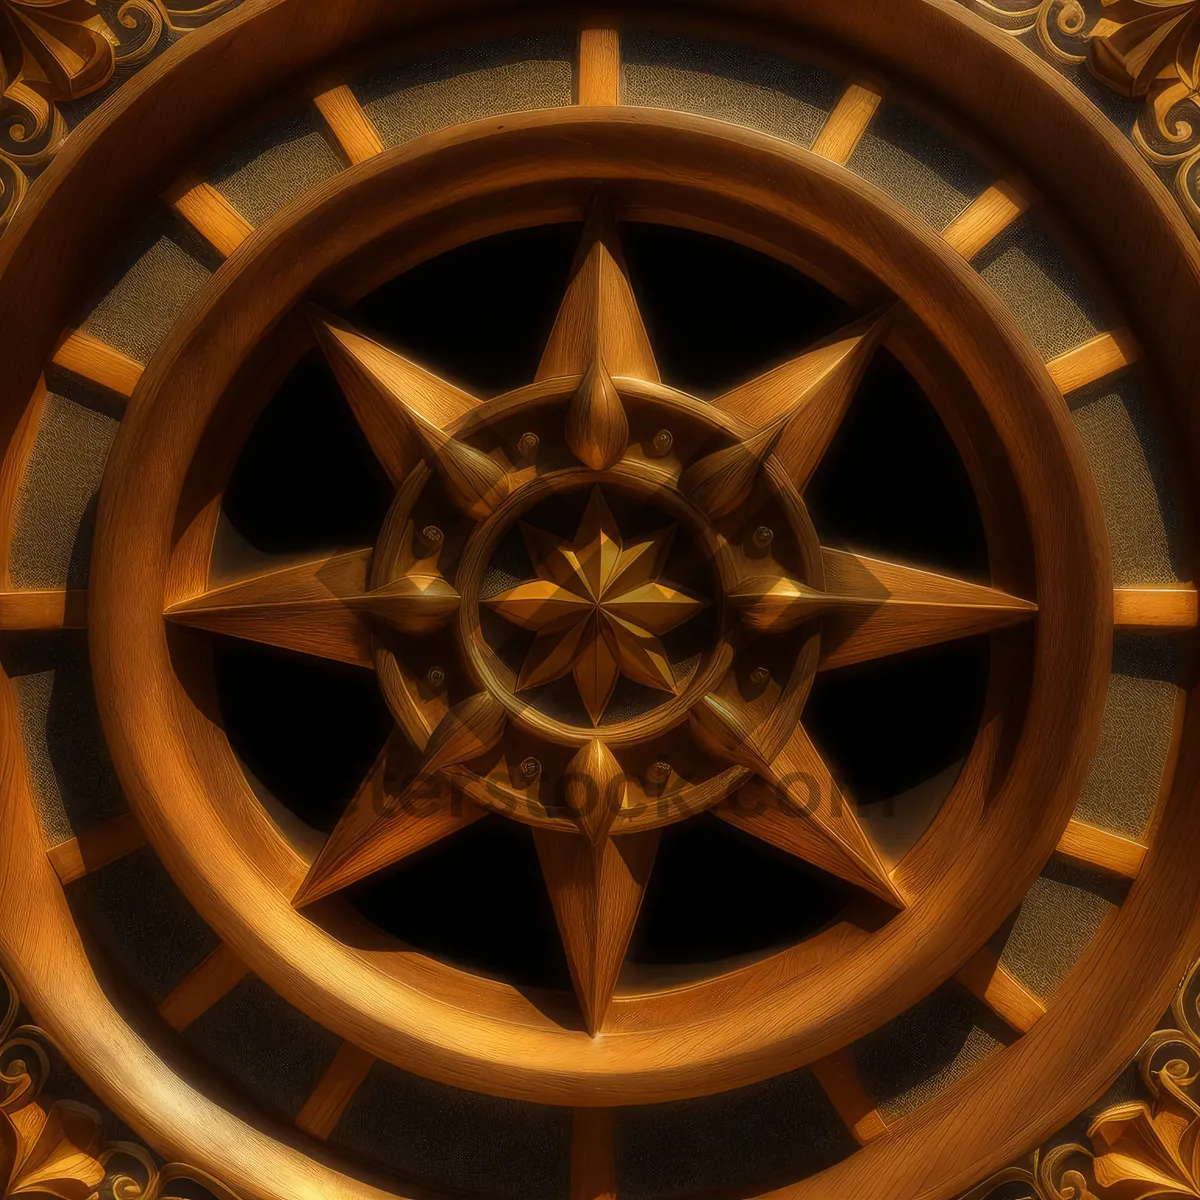 Picture of Vintage Wheel and Dome Architecture in Old Framework